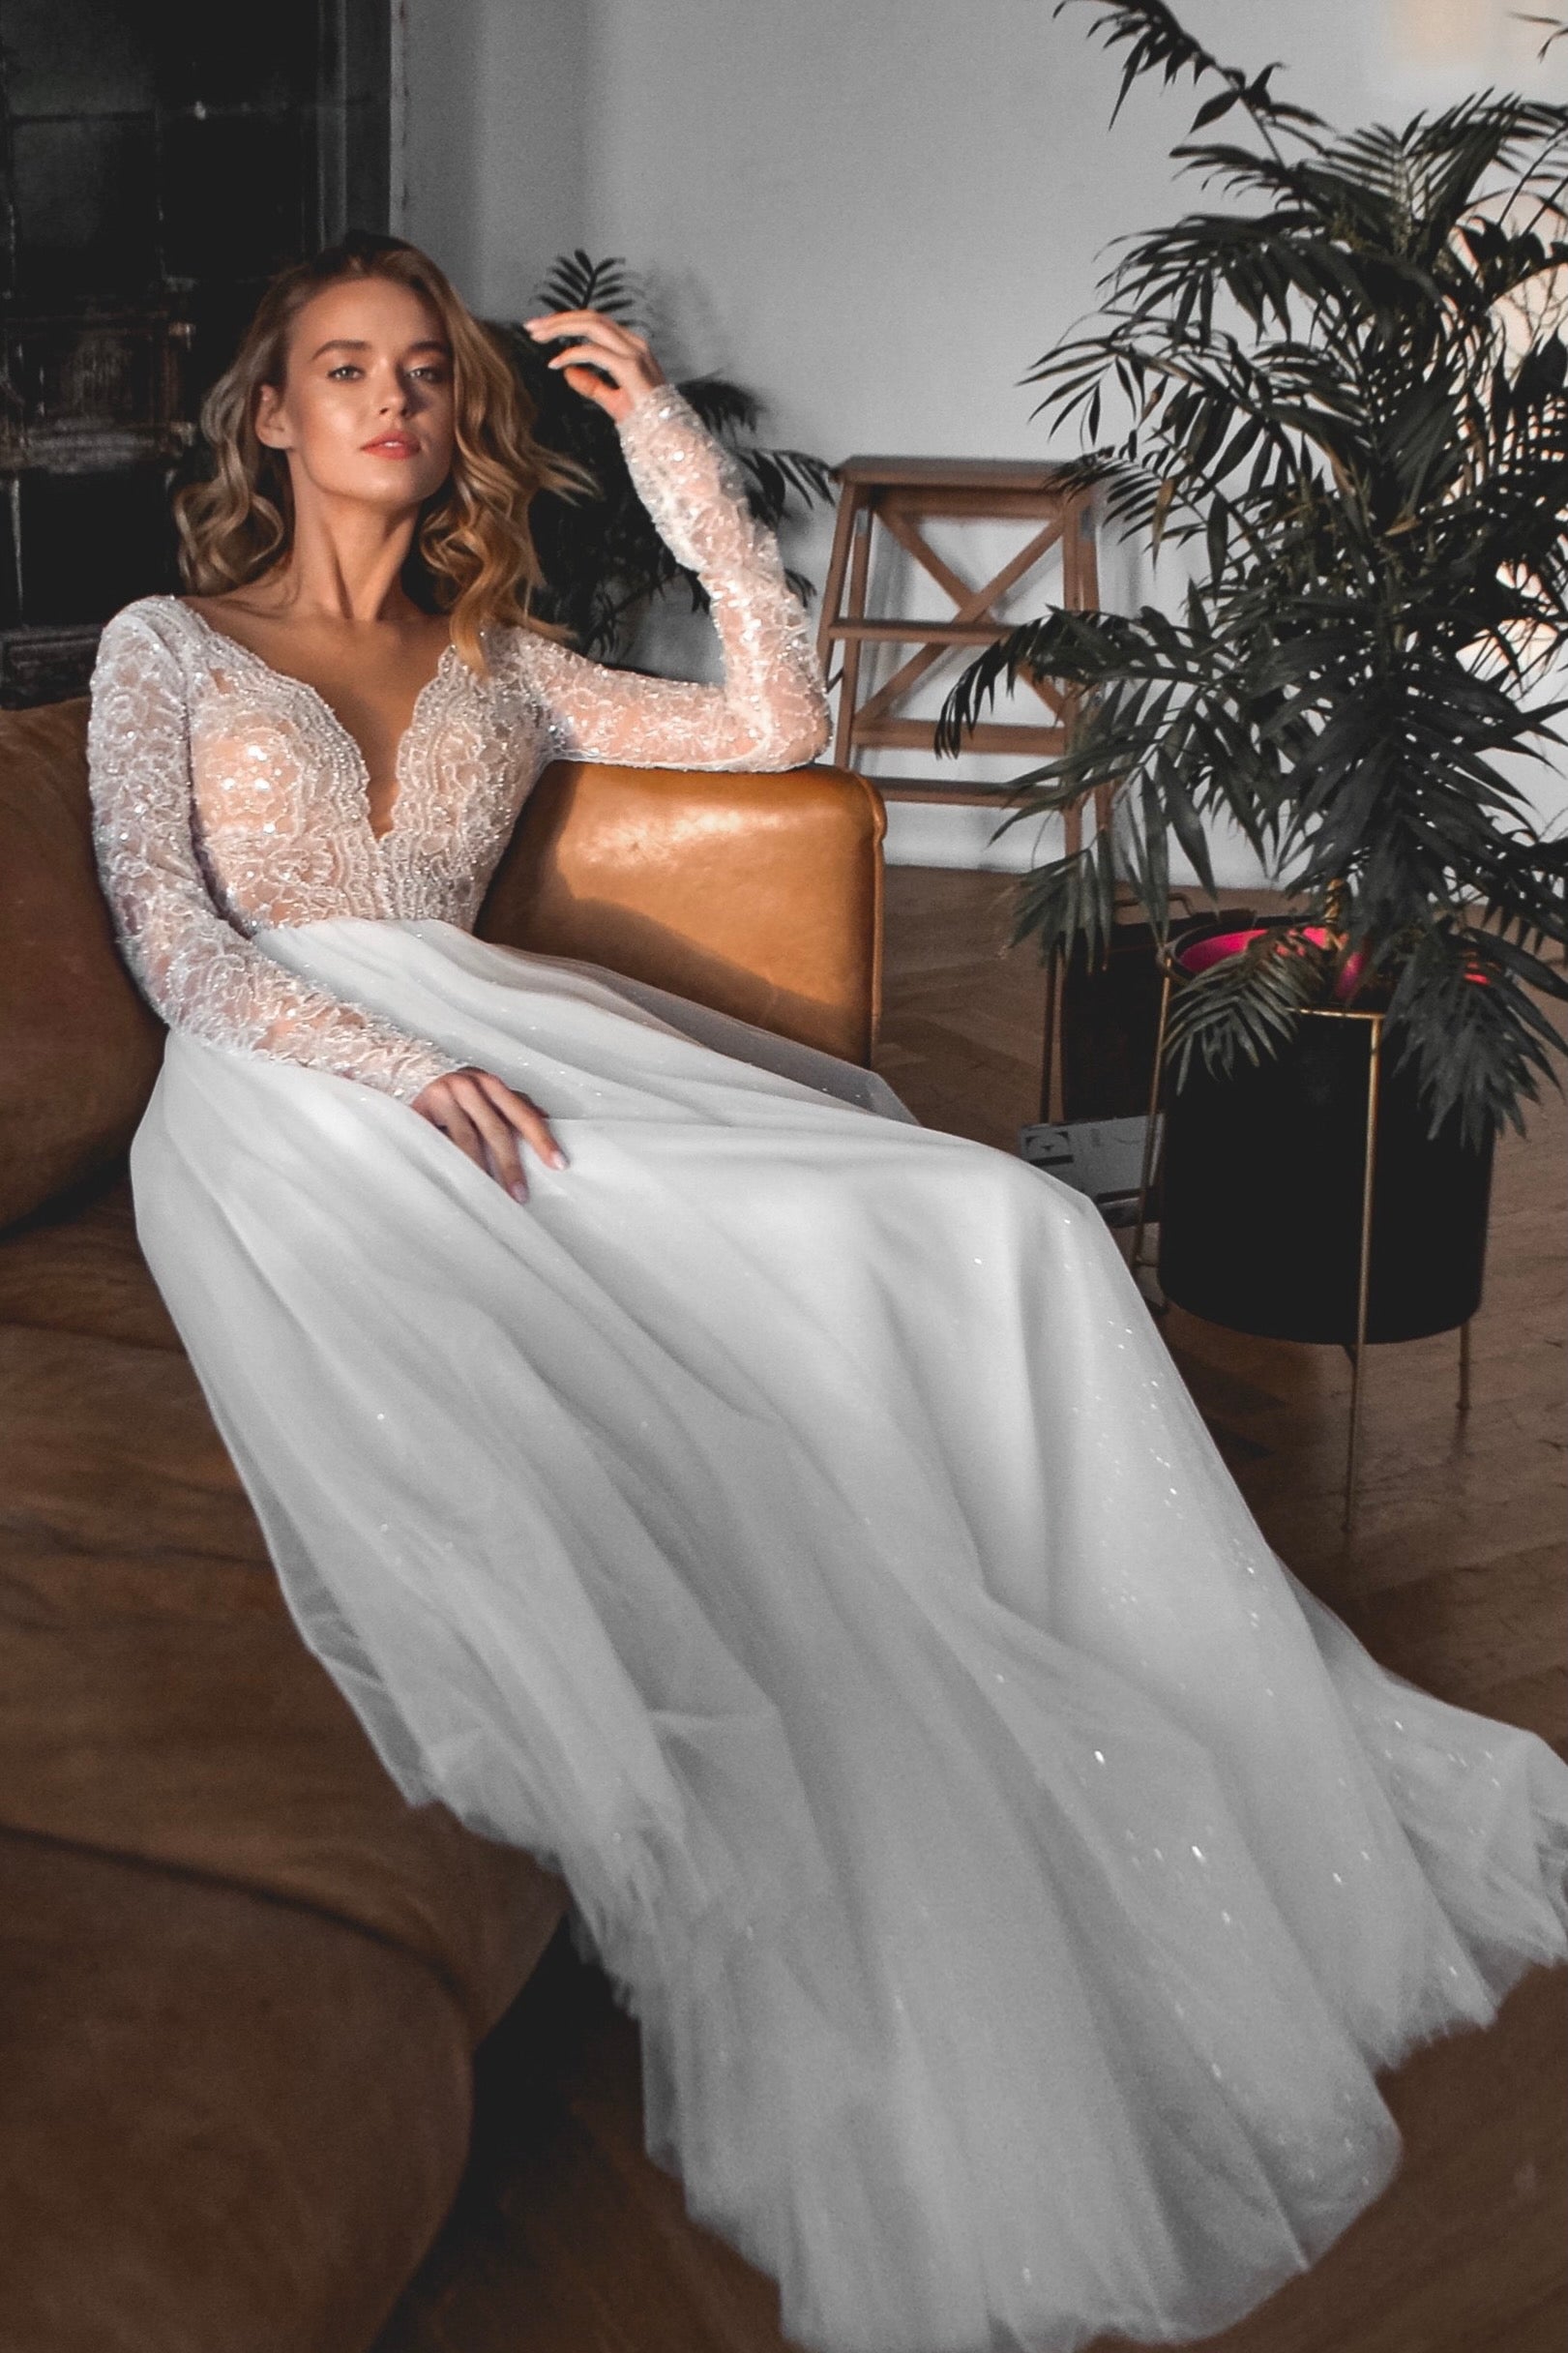 Simple Wedding Dress Perfect for Elopement, Reception or Unique Wedding:  Lace Bridal Bodysuit With Long Sleeves and Satin Skirt With Pockets -   Canada